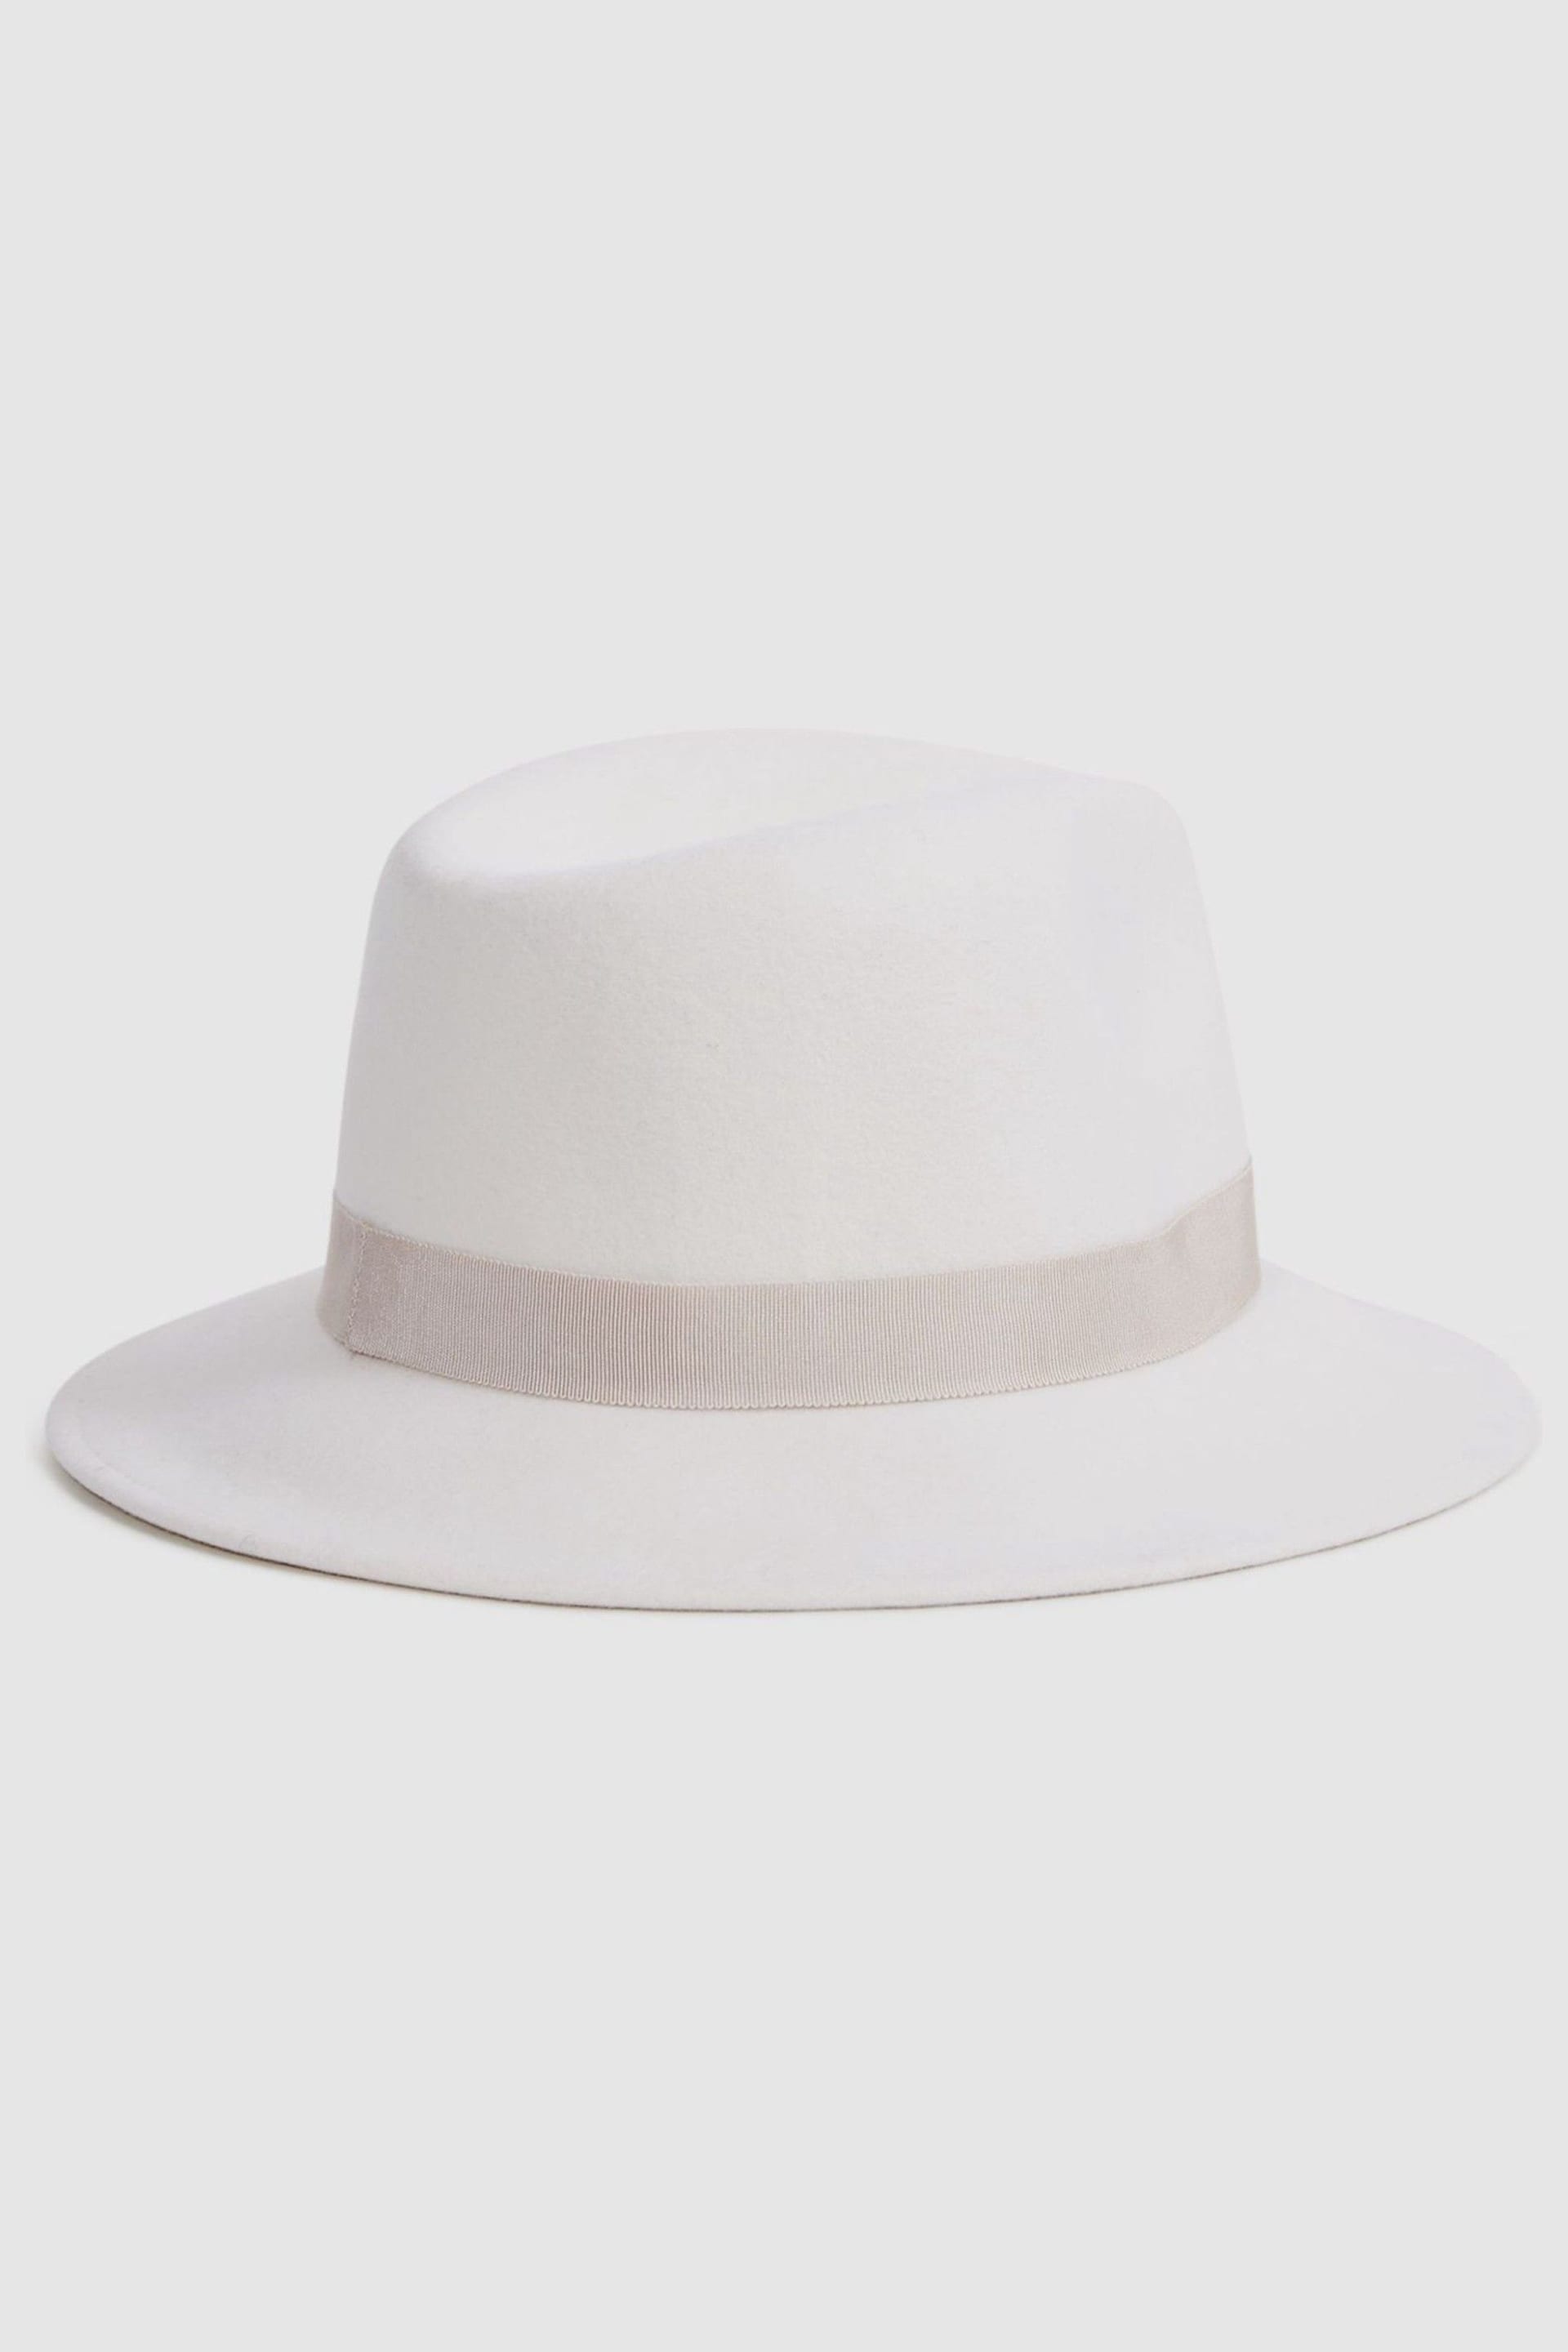 Reiss Ivory Ally Wool Fedora Hat - Image 3 of 4